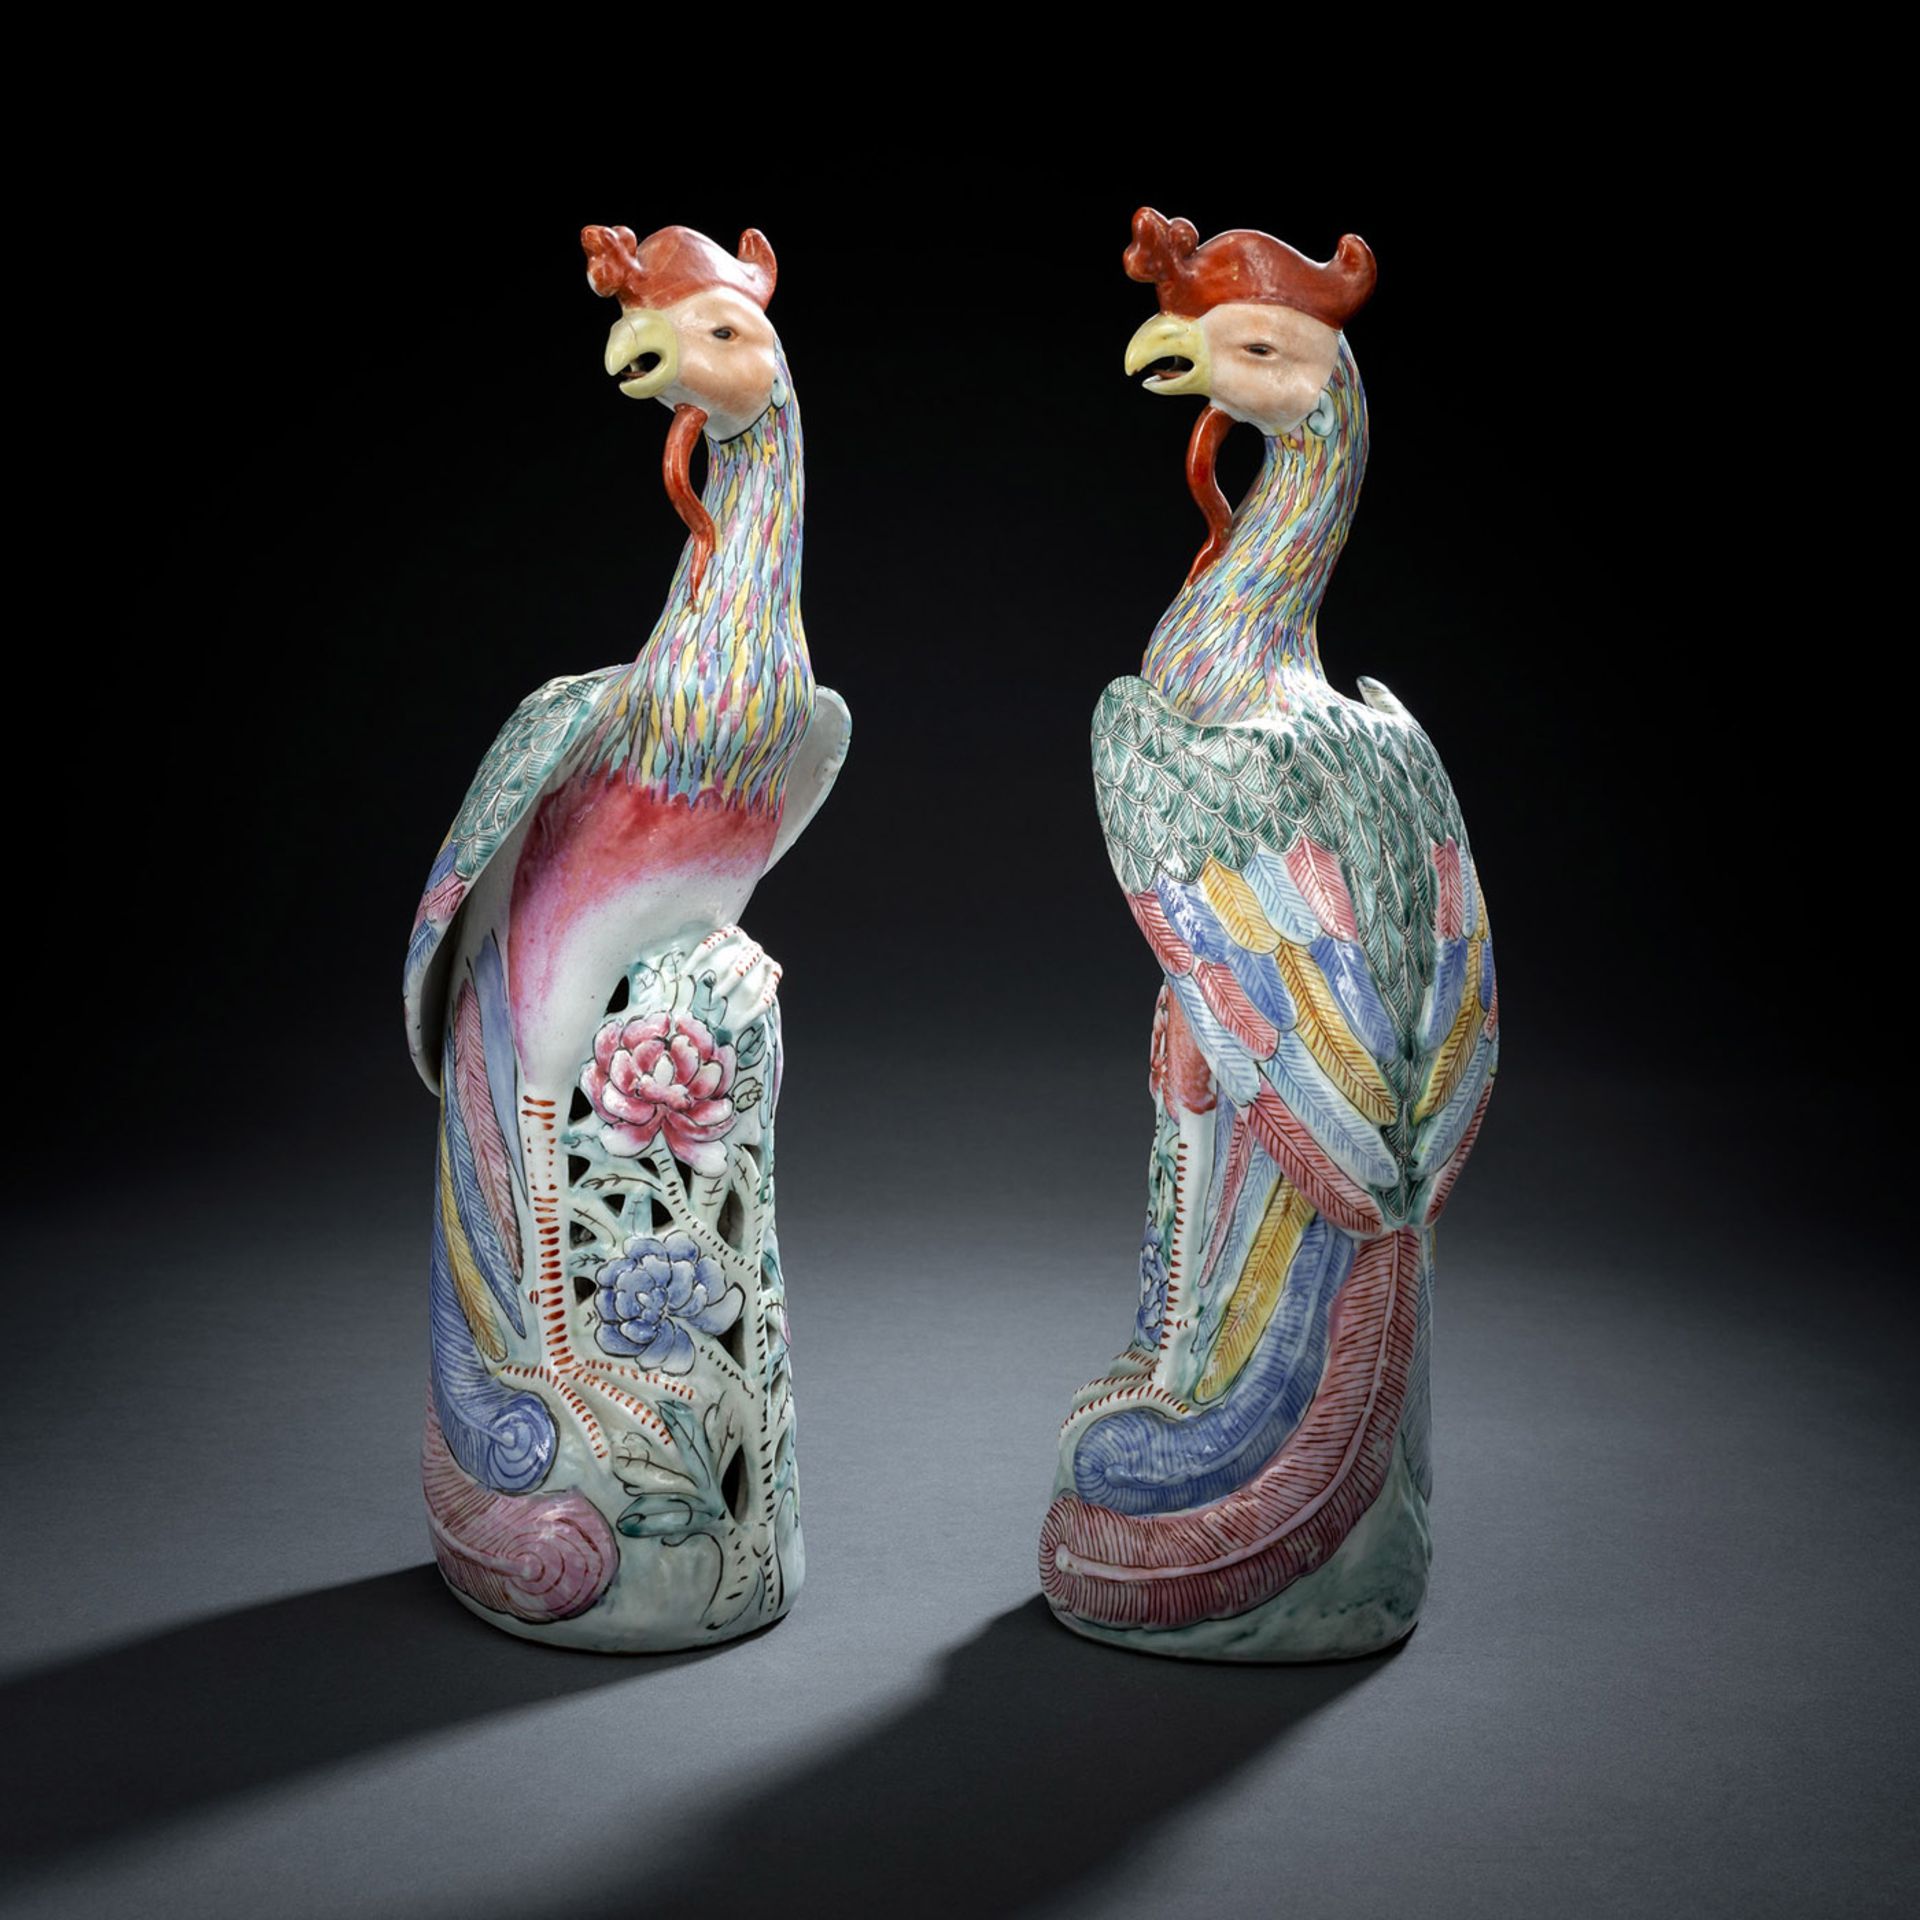 A PAIR OF POLYCHROME PAINTED PORCELAIN PHIOENIXES BY JIN YUNYAN (1904-1986)